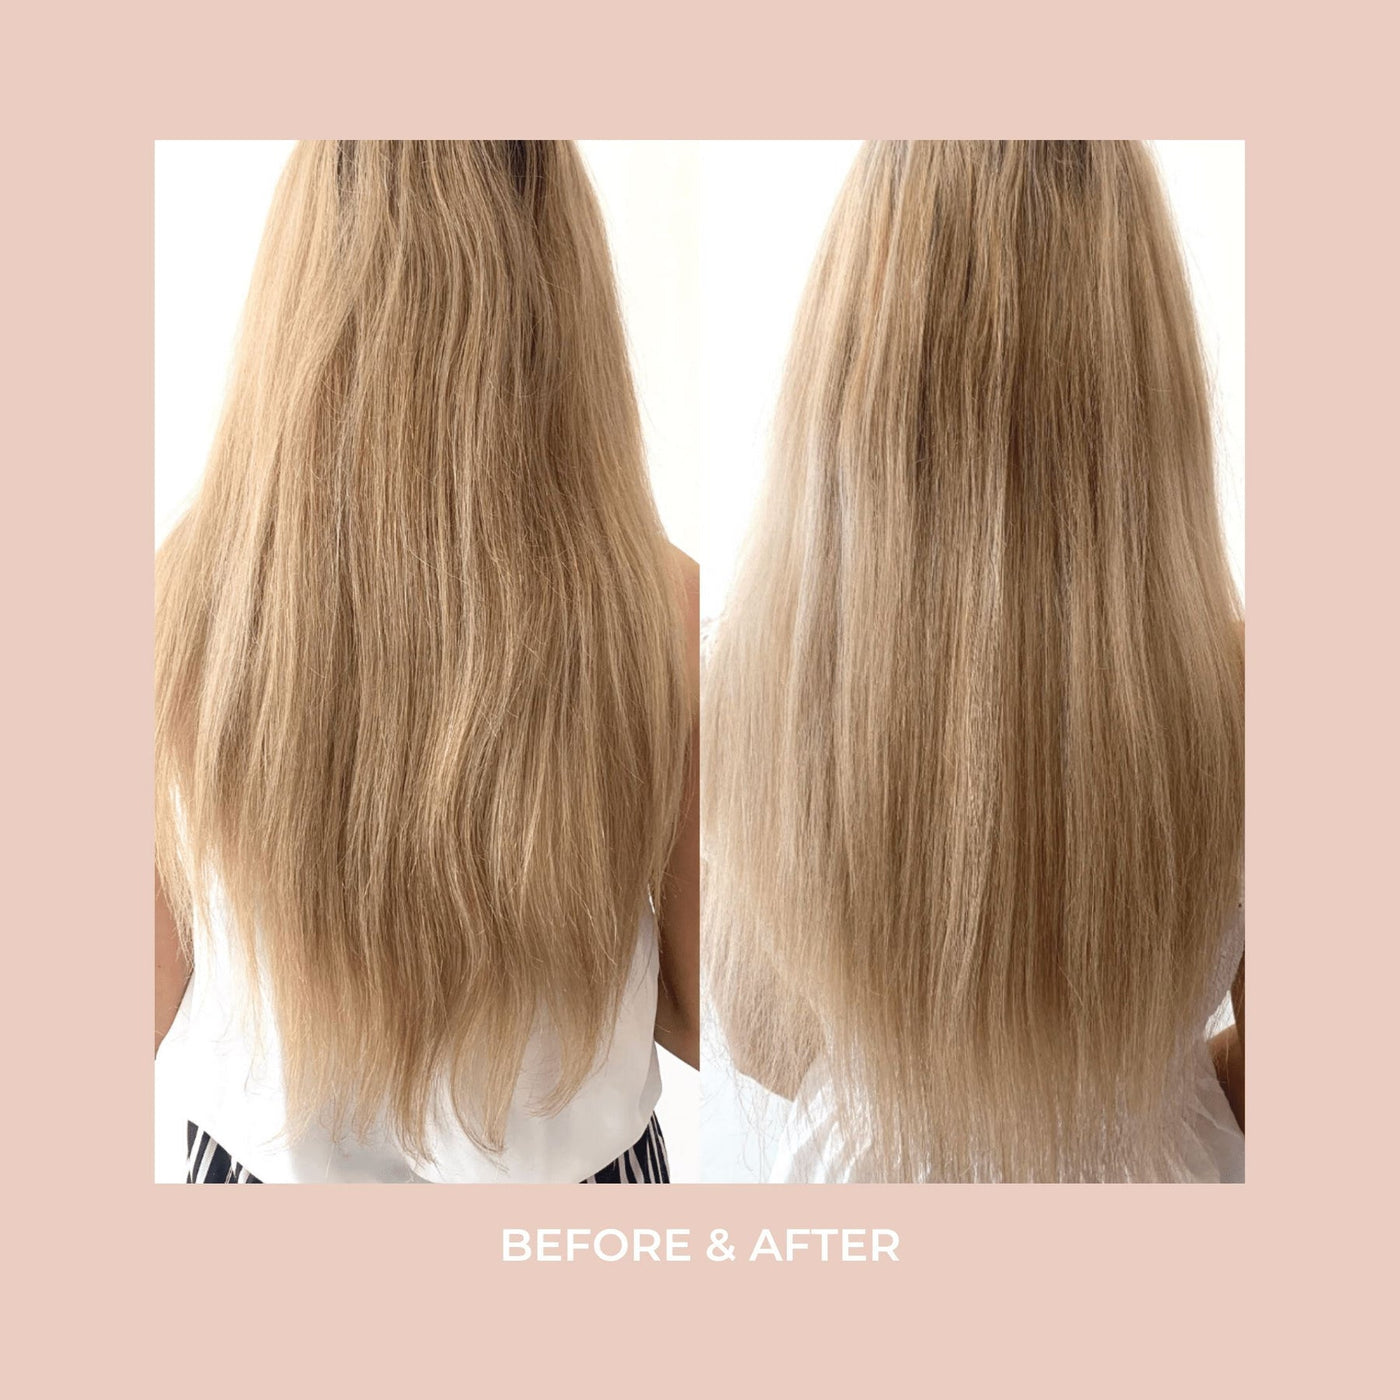 VANI-T Lumiere Collagen Peptides (250g) hair before after